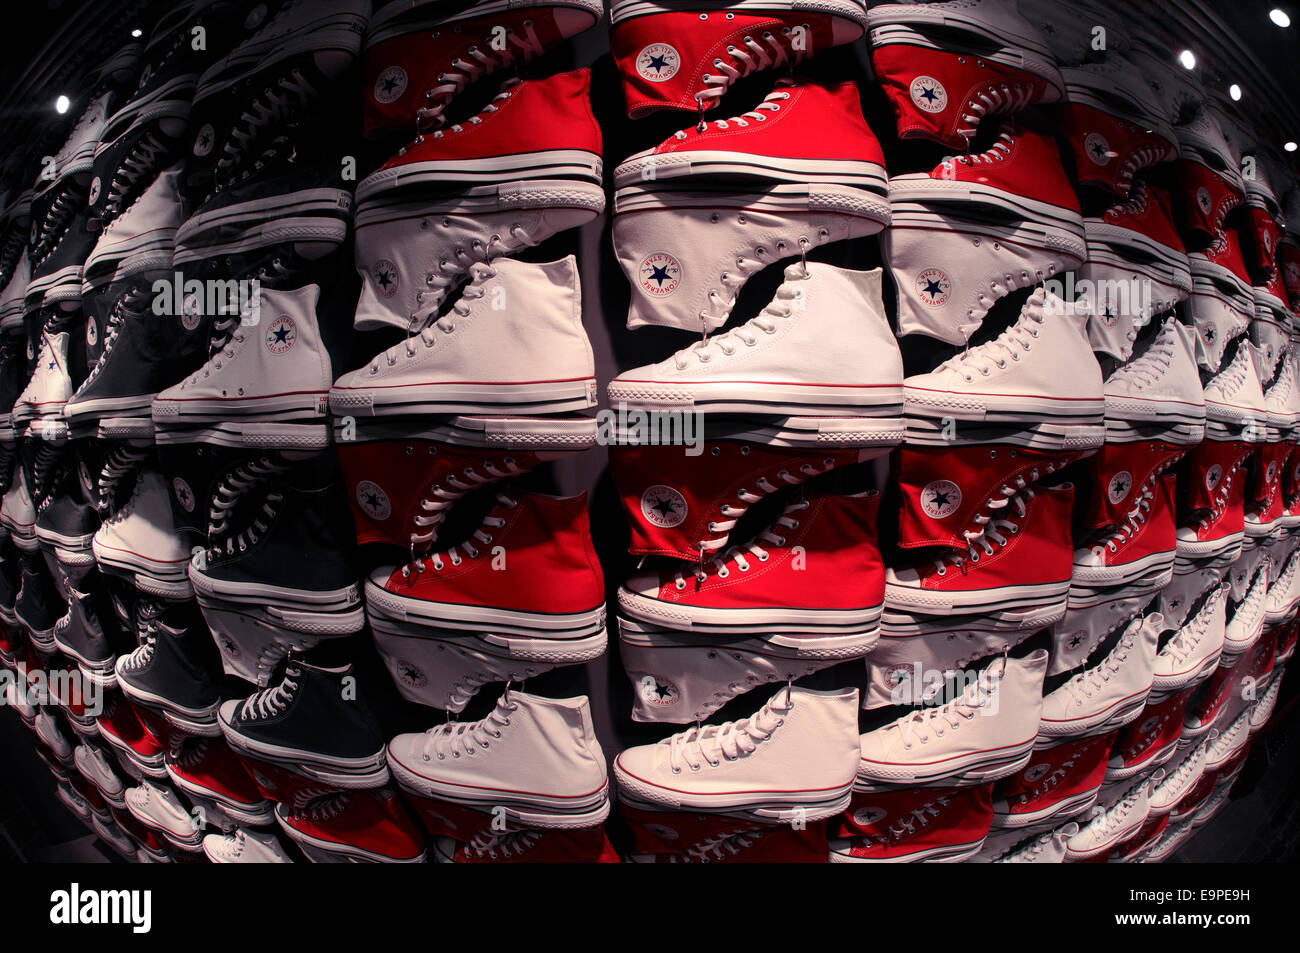 Converse All Star chaussures. Banque D'Images